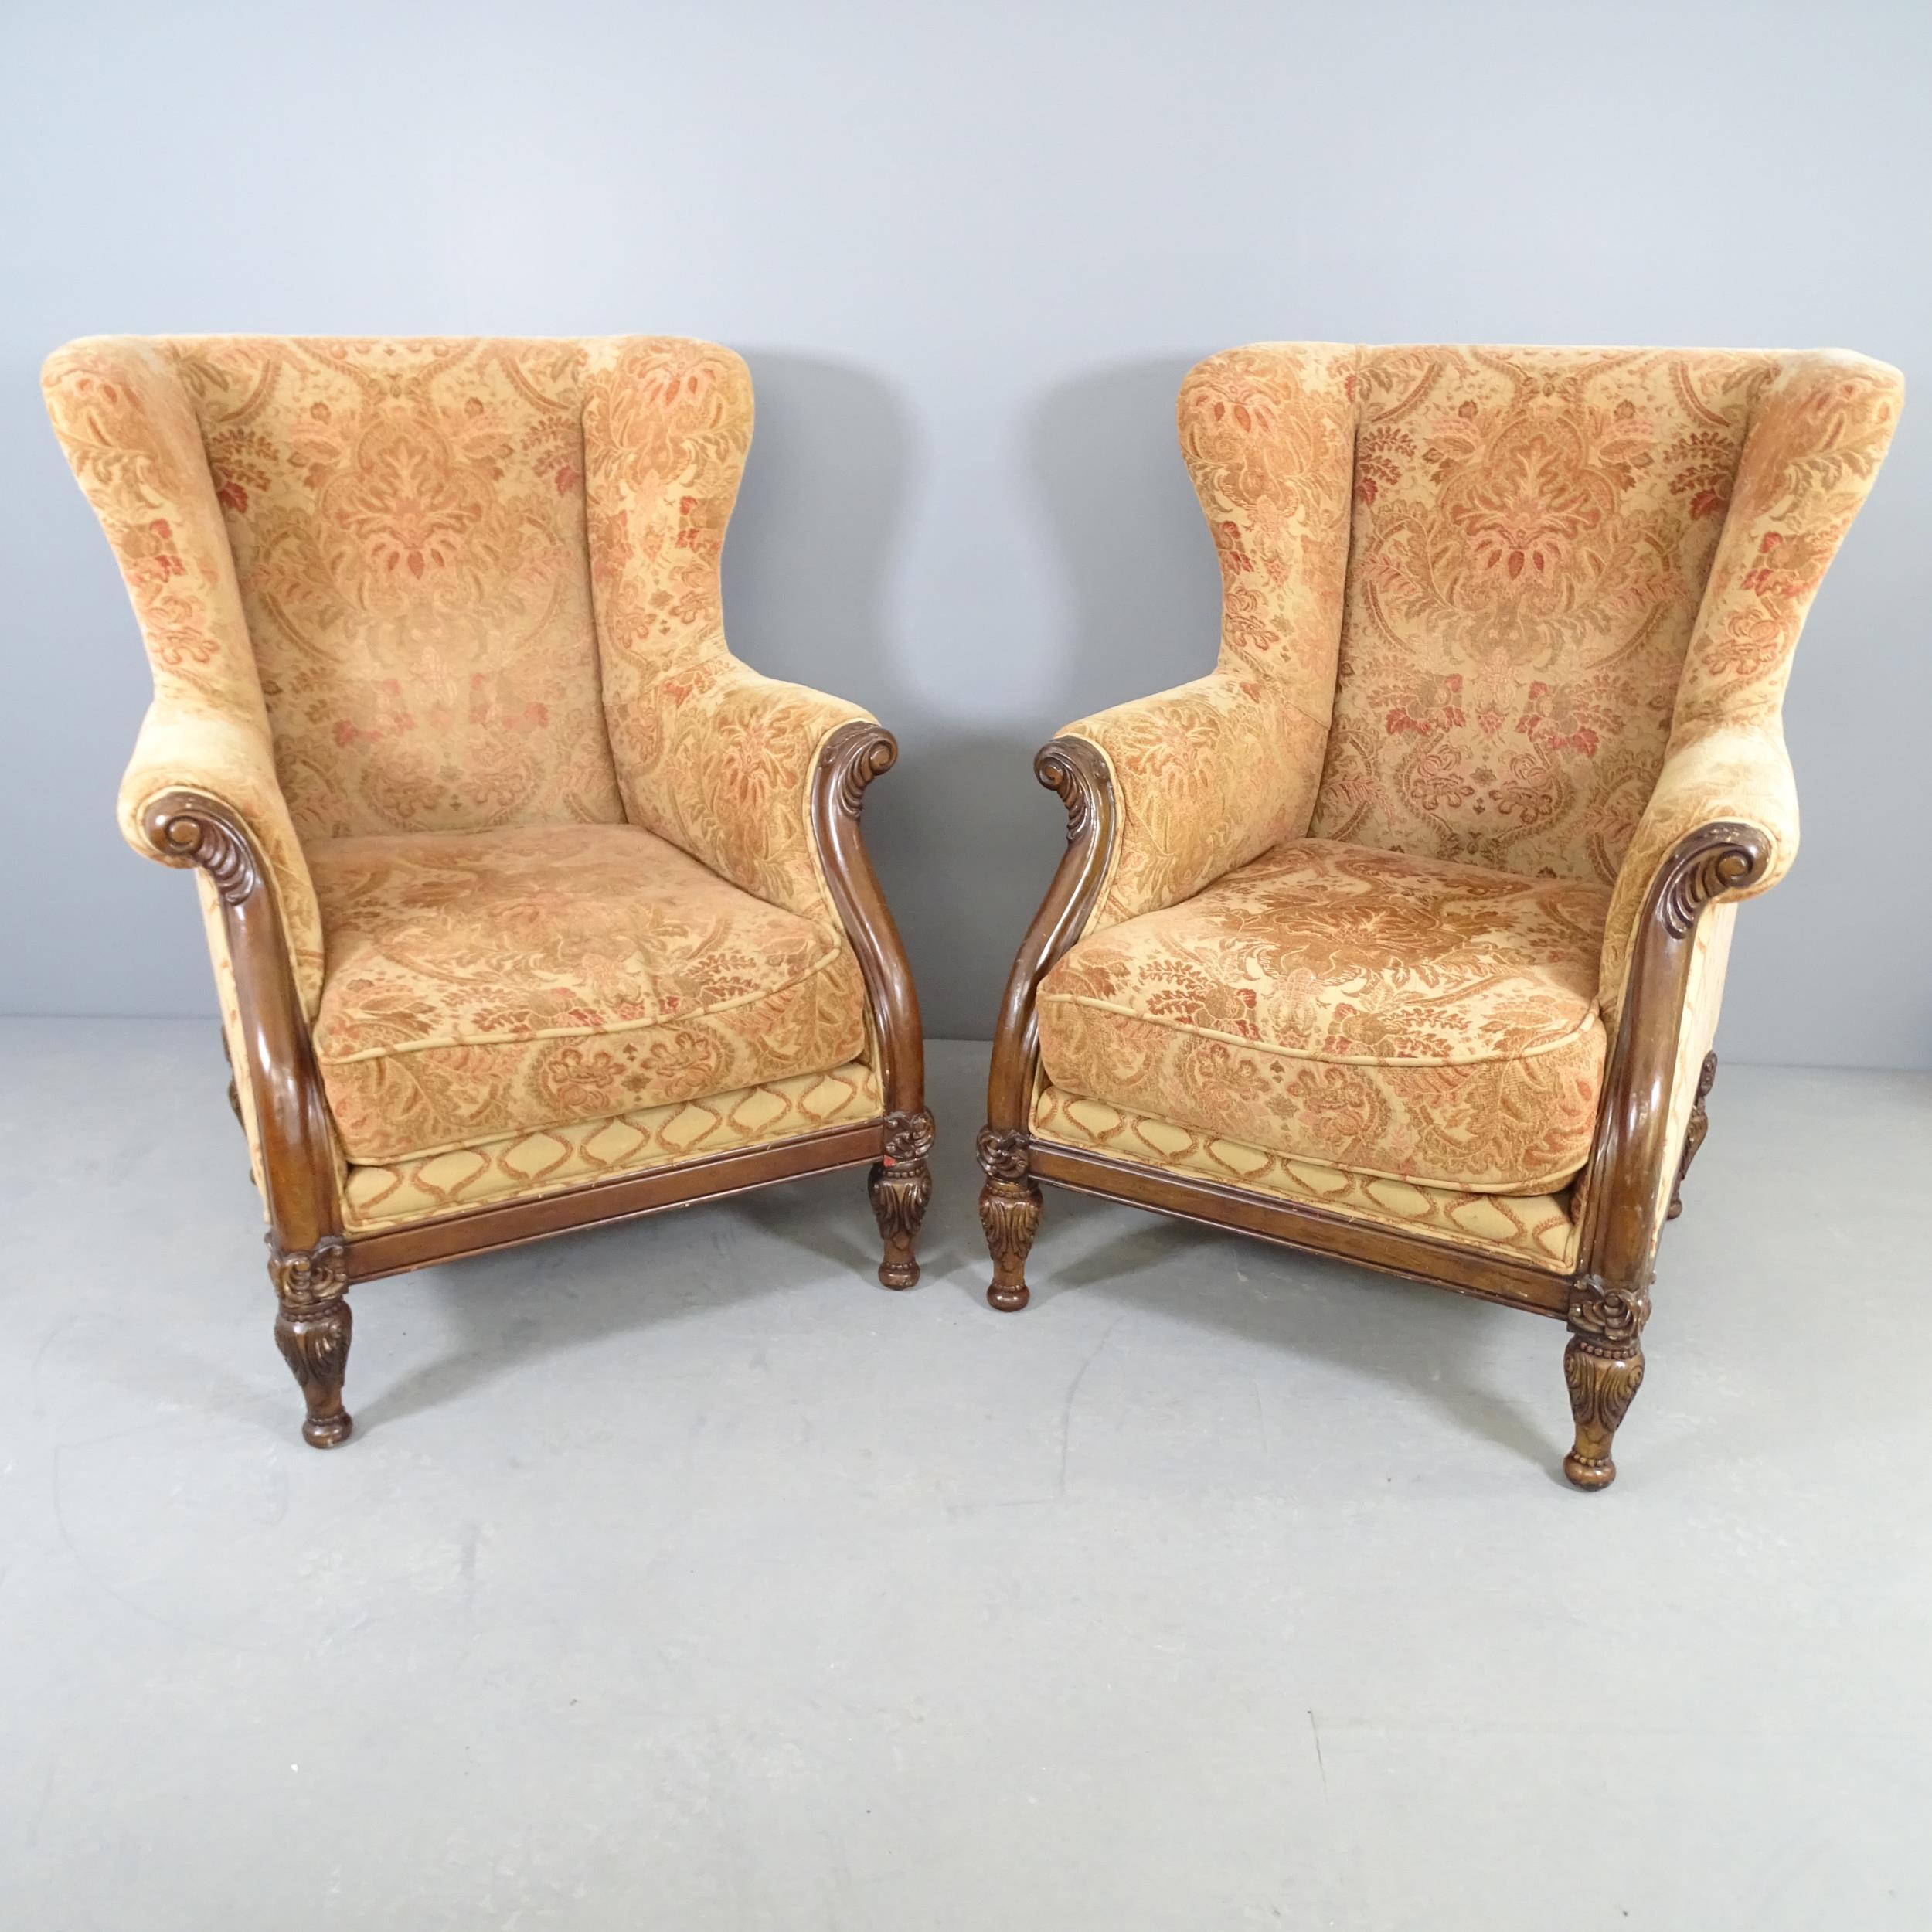 A pair of mahogany and upholstered George III style wingback armchairs. Overall 89x112x95cm, seat